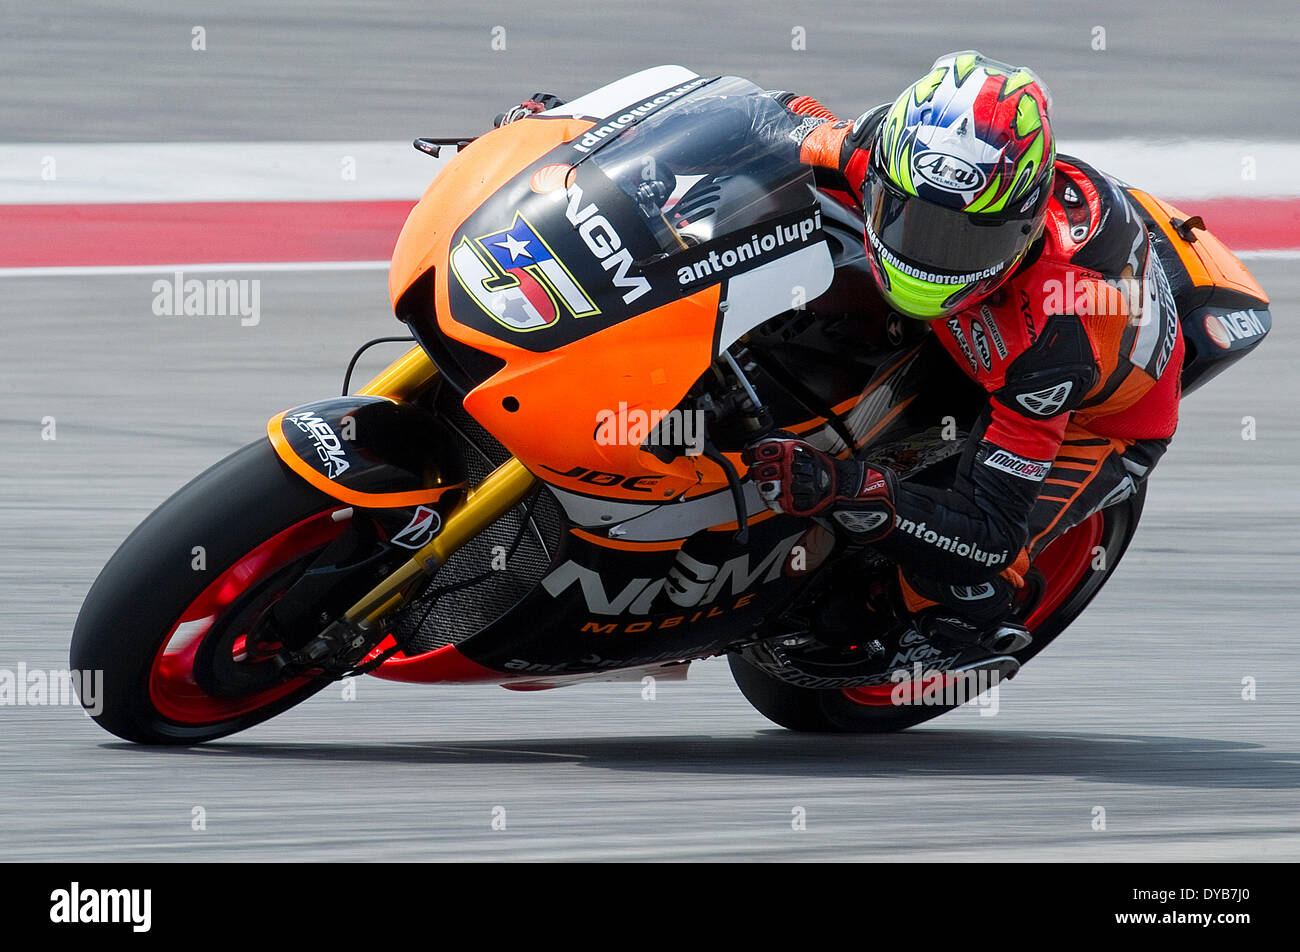 Austin, Texas, USA. 12th Apr, 2014. April 12, 2014: MotoGP Colin Edwards #05 with NGM Forward Racing at the Red Bull Grand Prix of the Americas. Austin, Texas. Credit:  csm/Alamy Live News Stock Photo